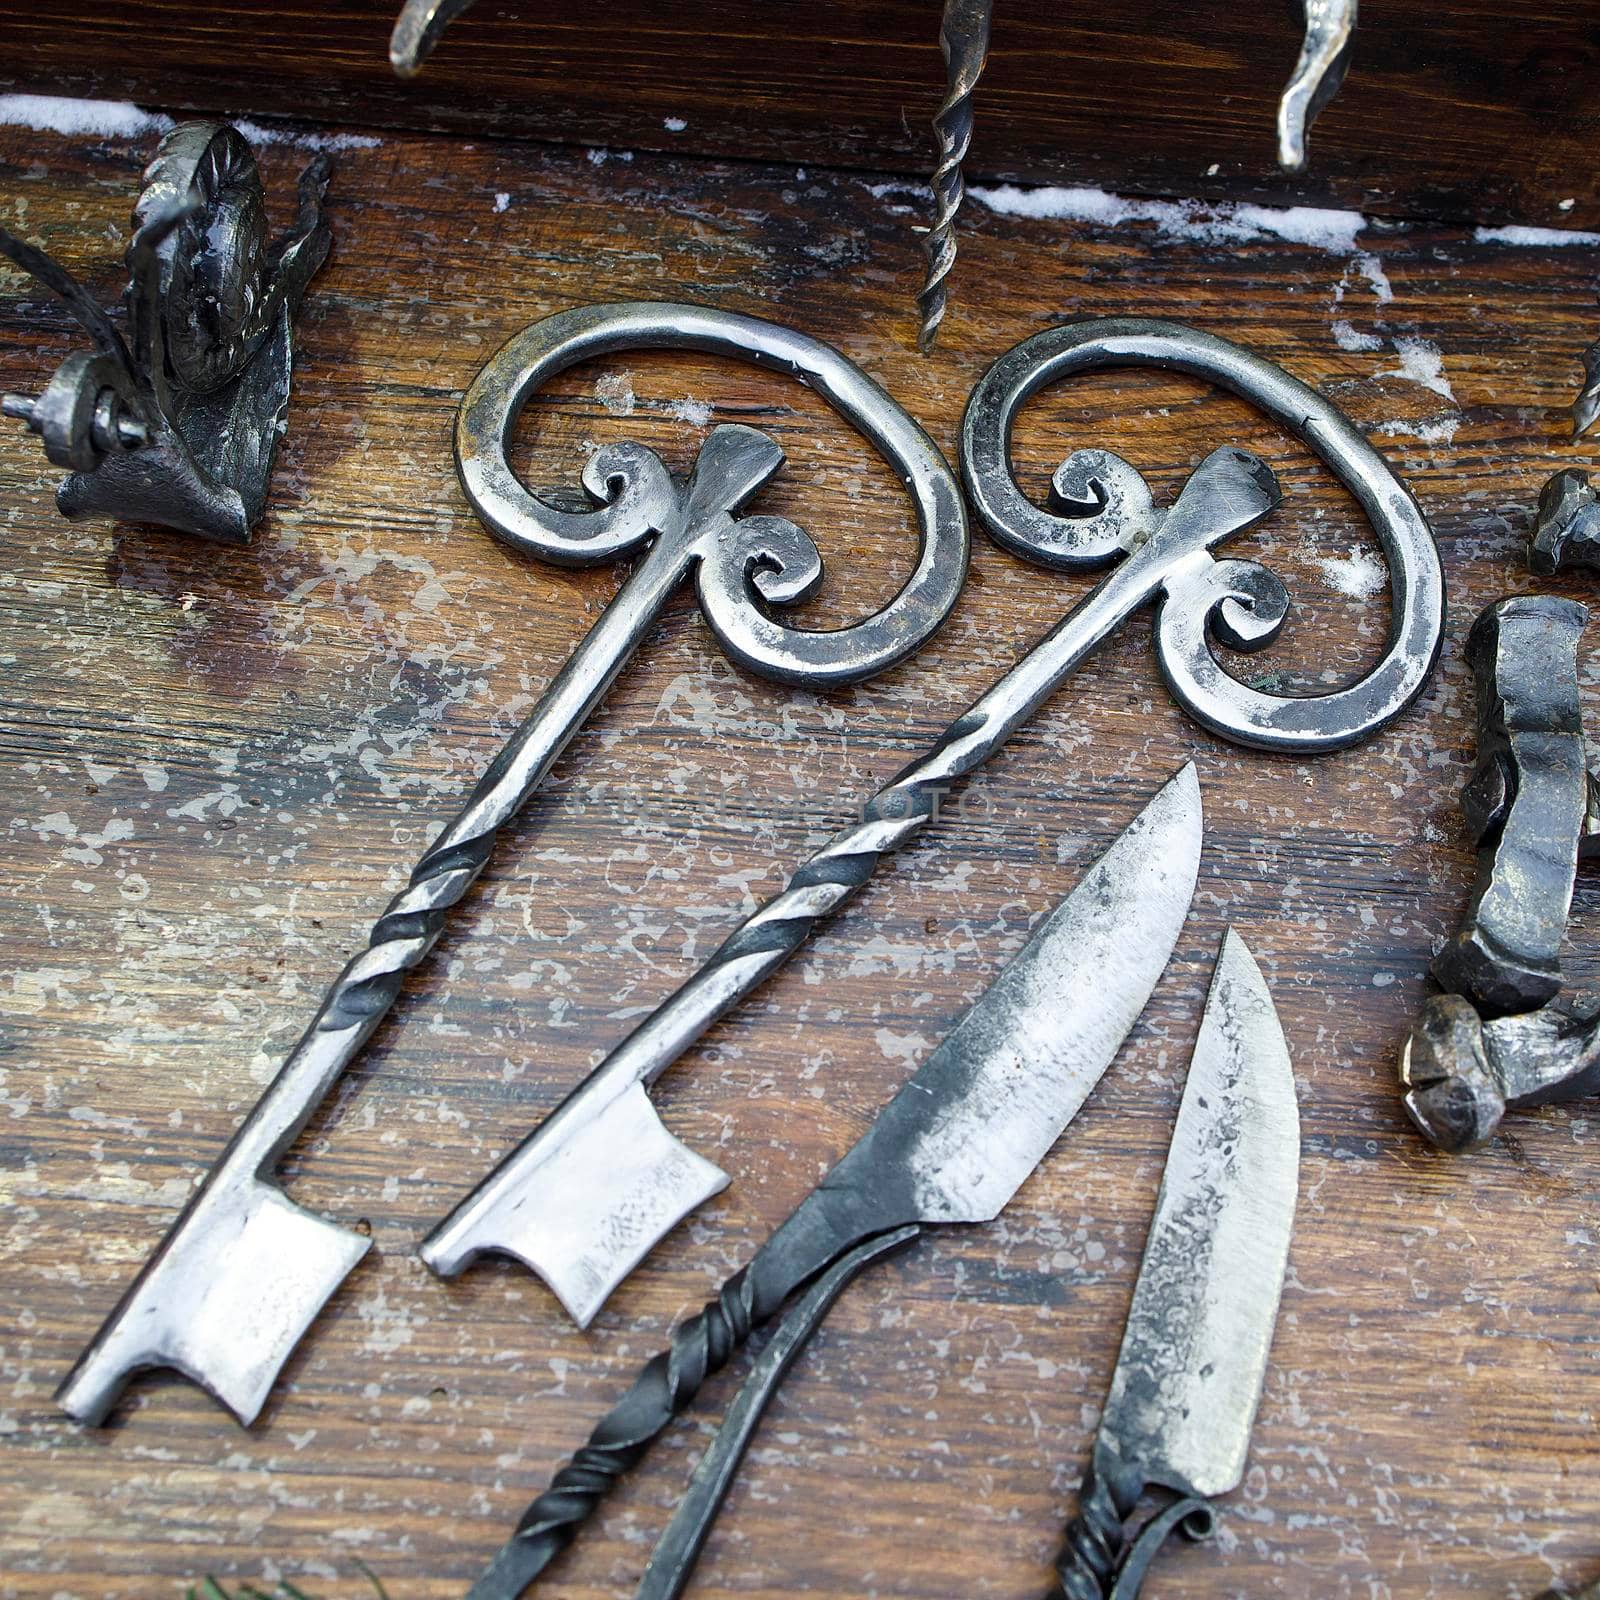 Forged keys and knives are on the counter for sale